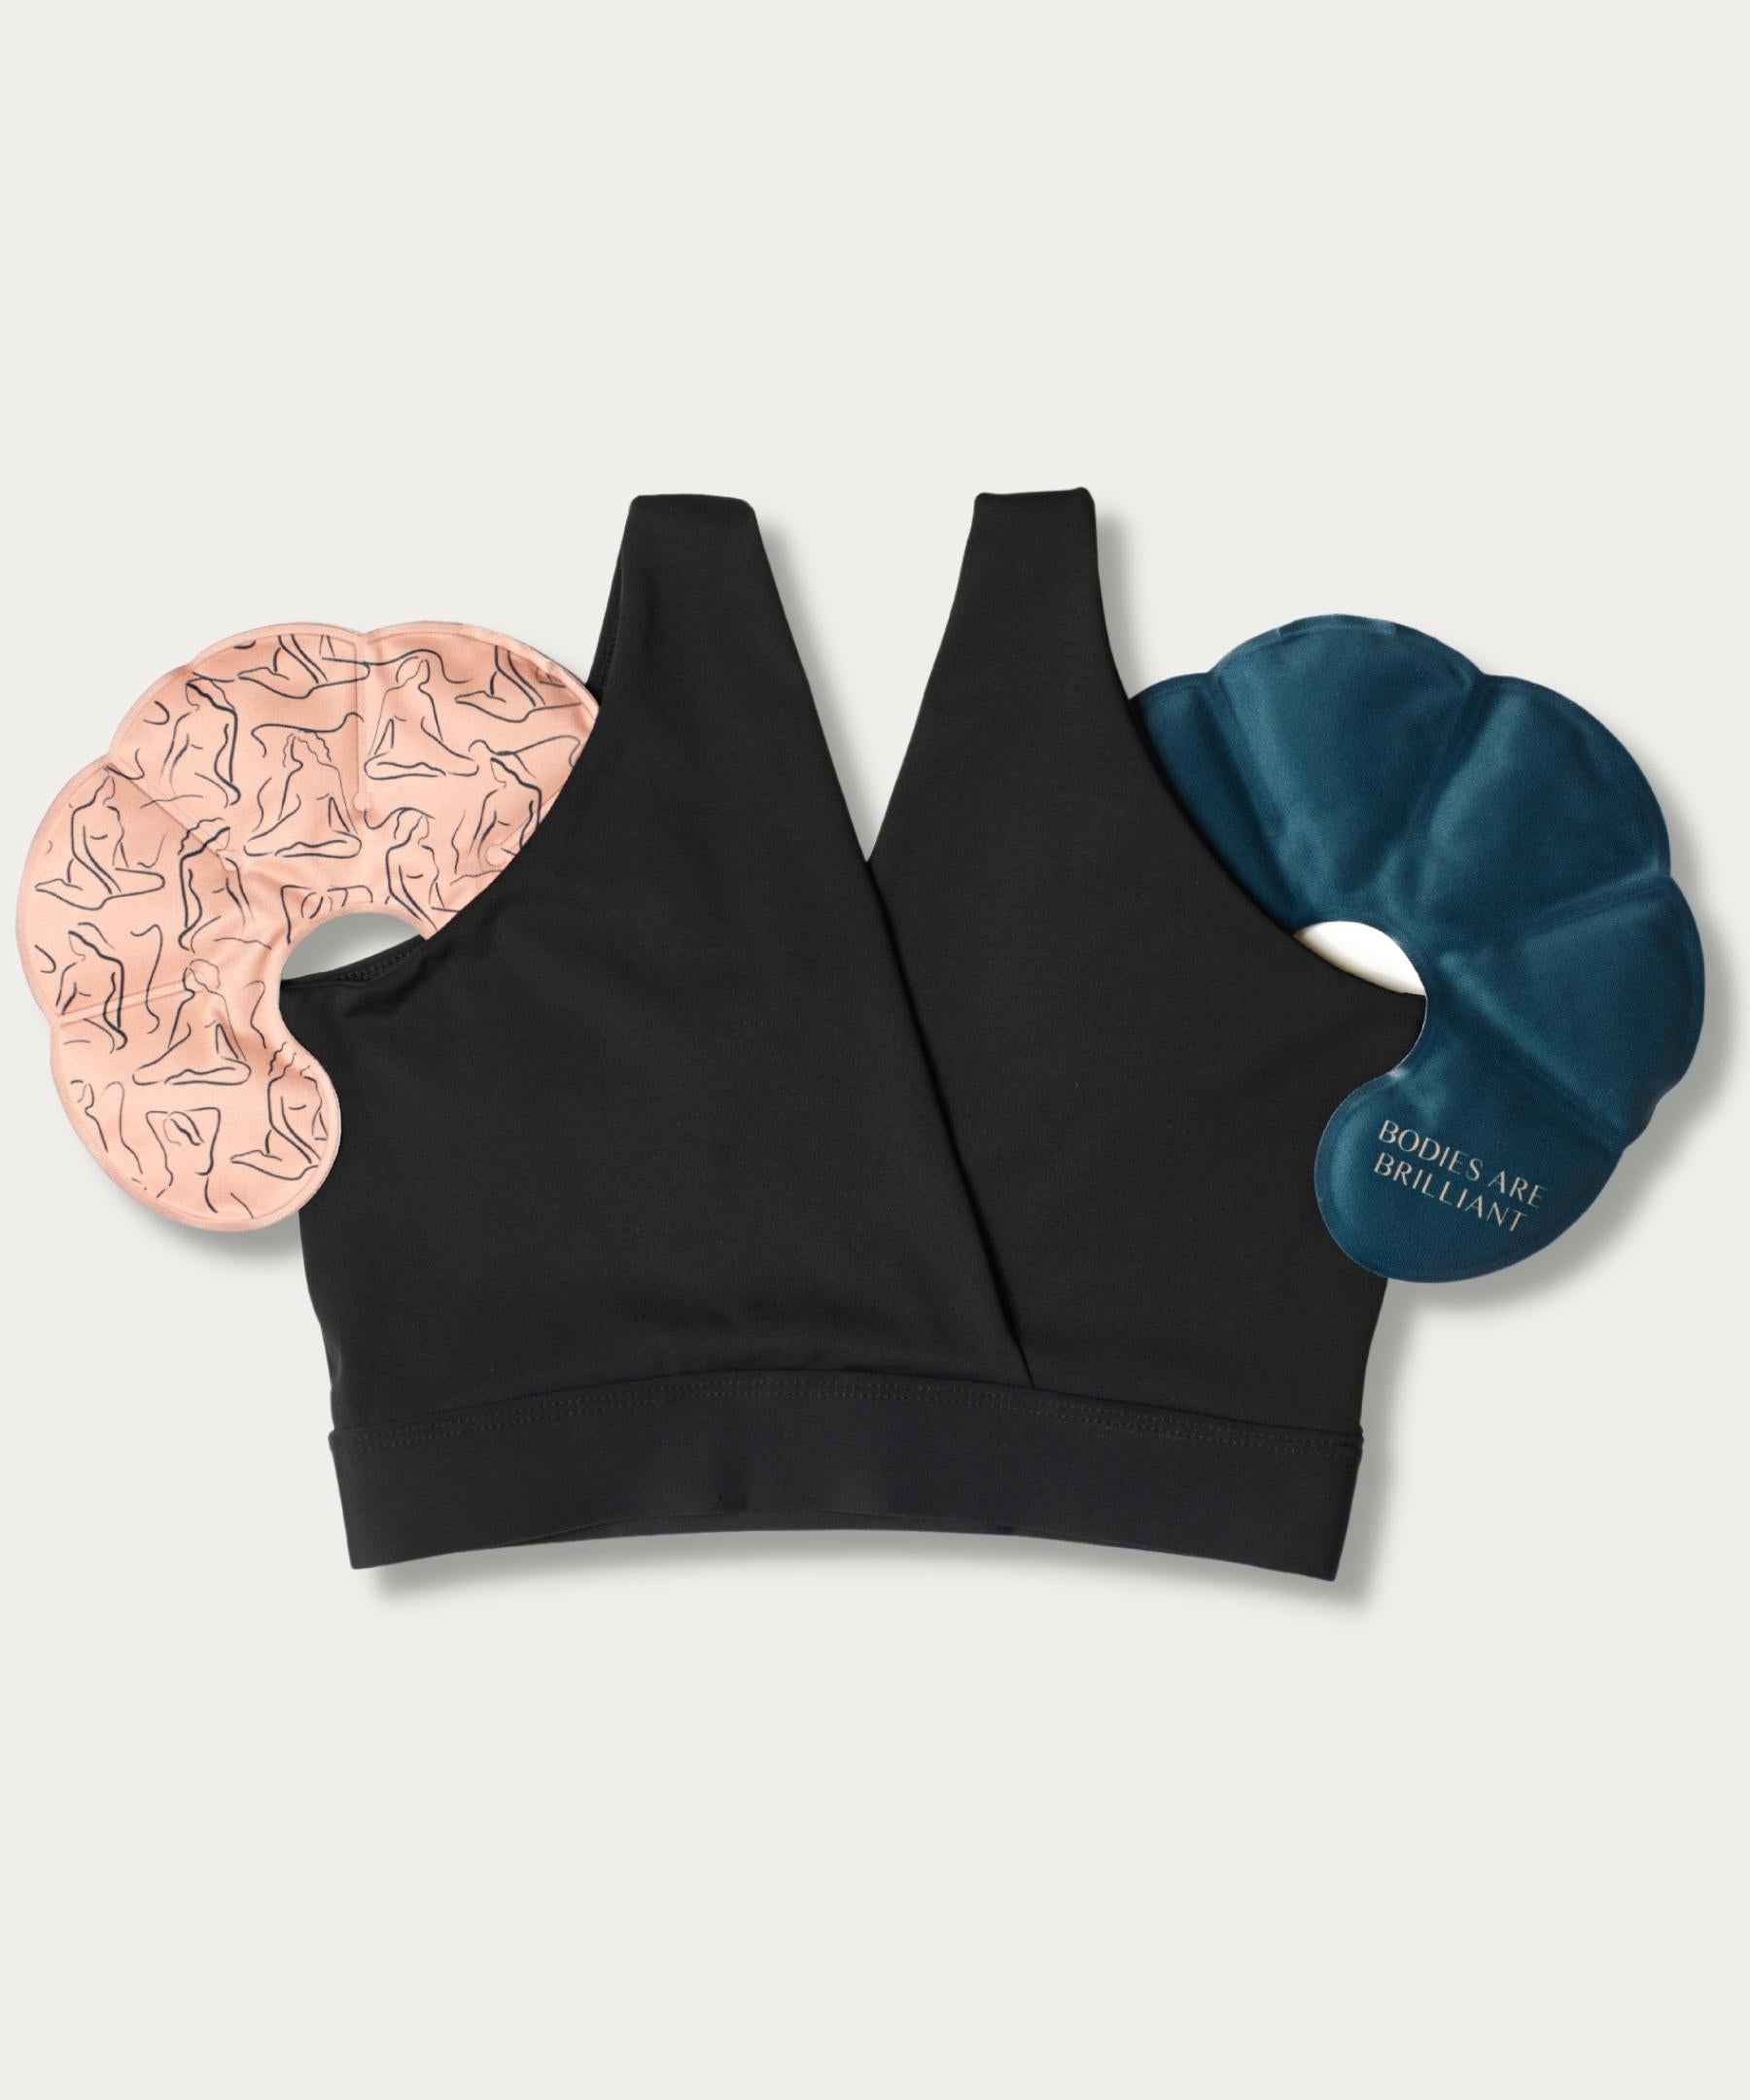 Luguiic Breast Ice Pack for Nursing Soreness